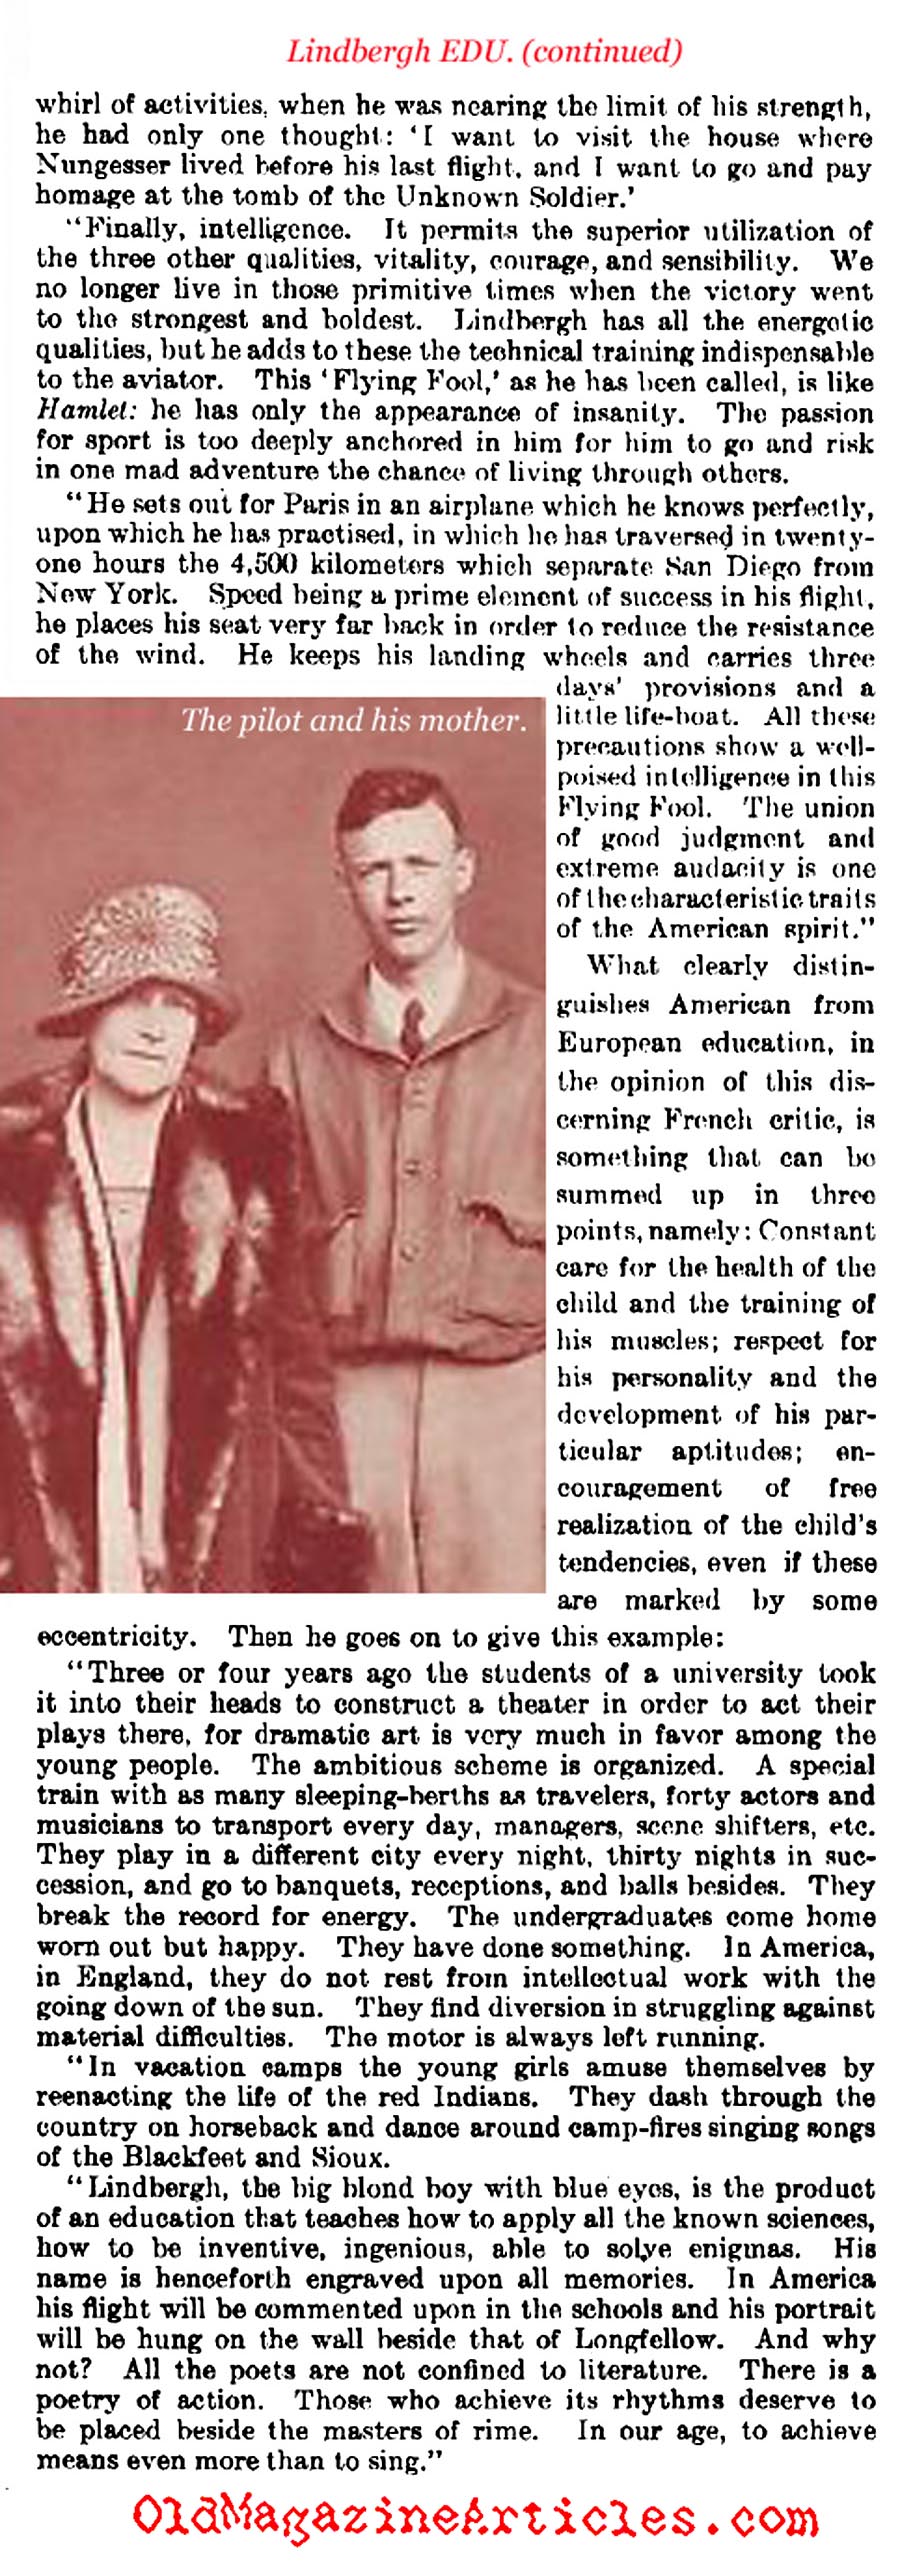 Charles Lindbergh: Loved by the French (Literary Digest, 1927)